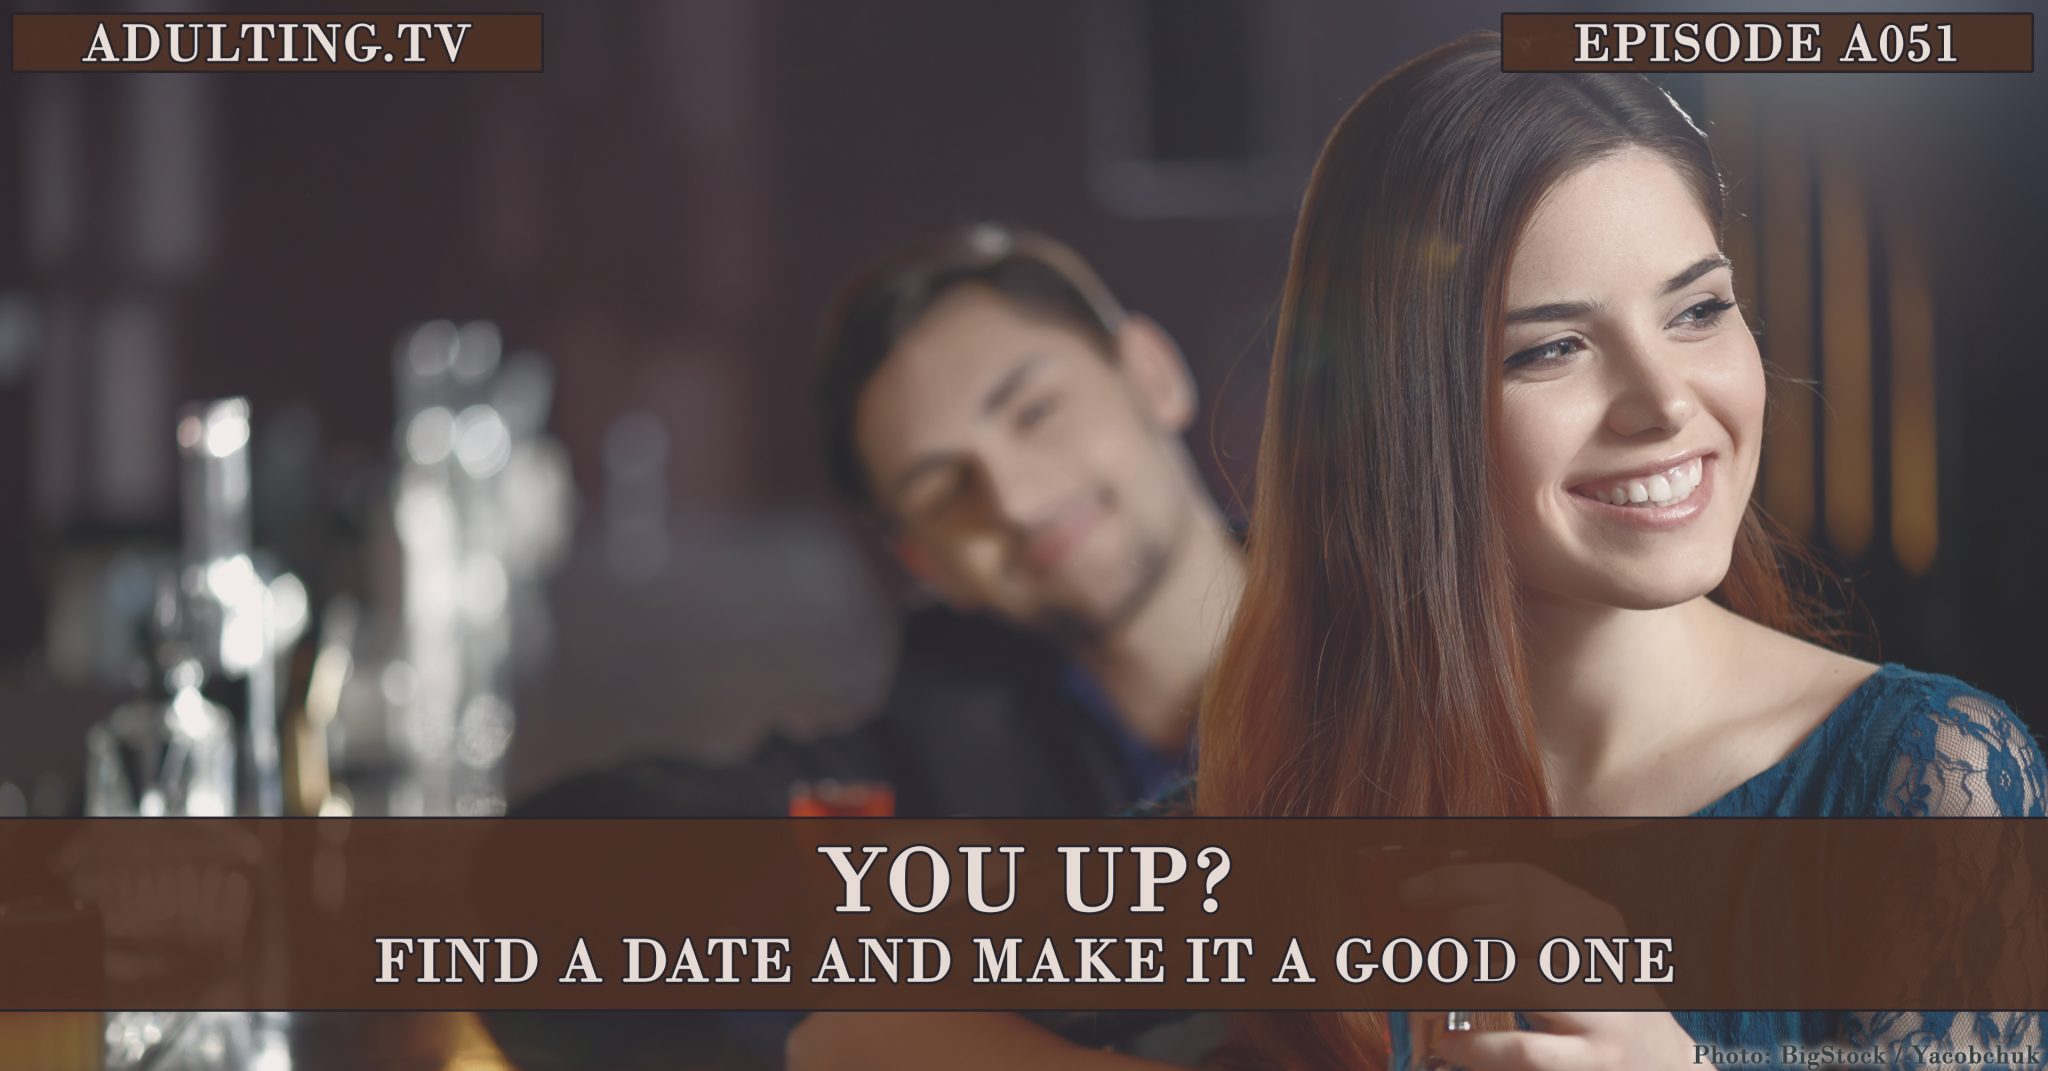 Online Dating - A New Way Of Finding Your Partner